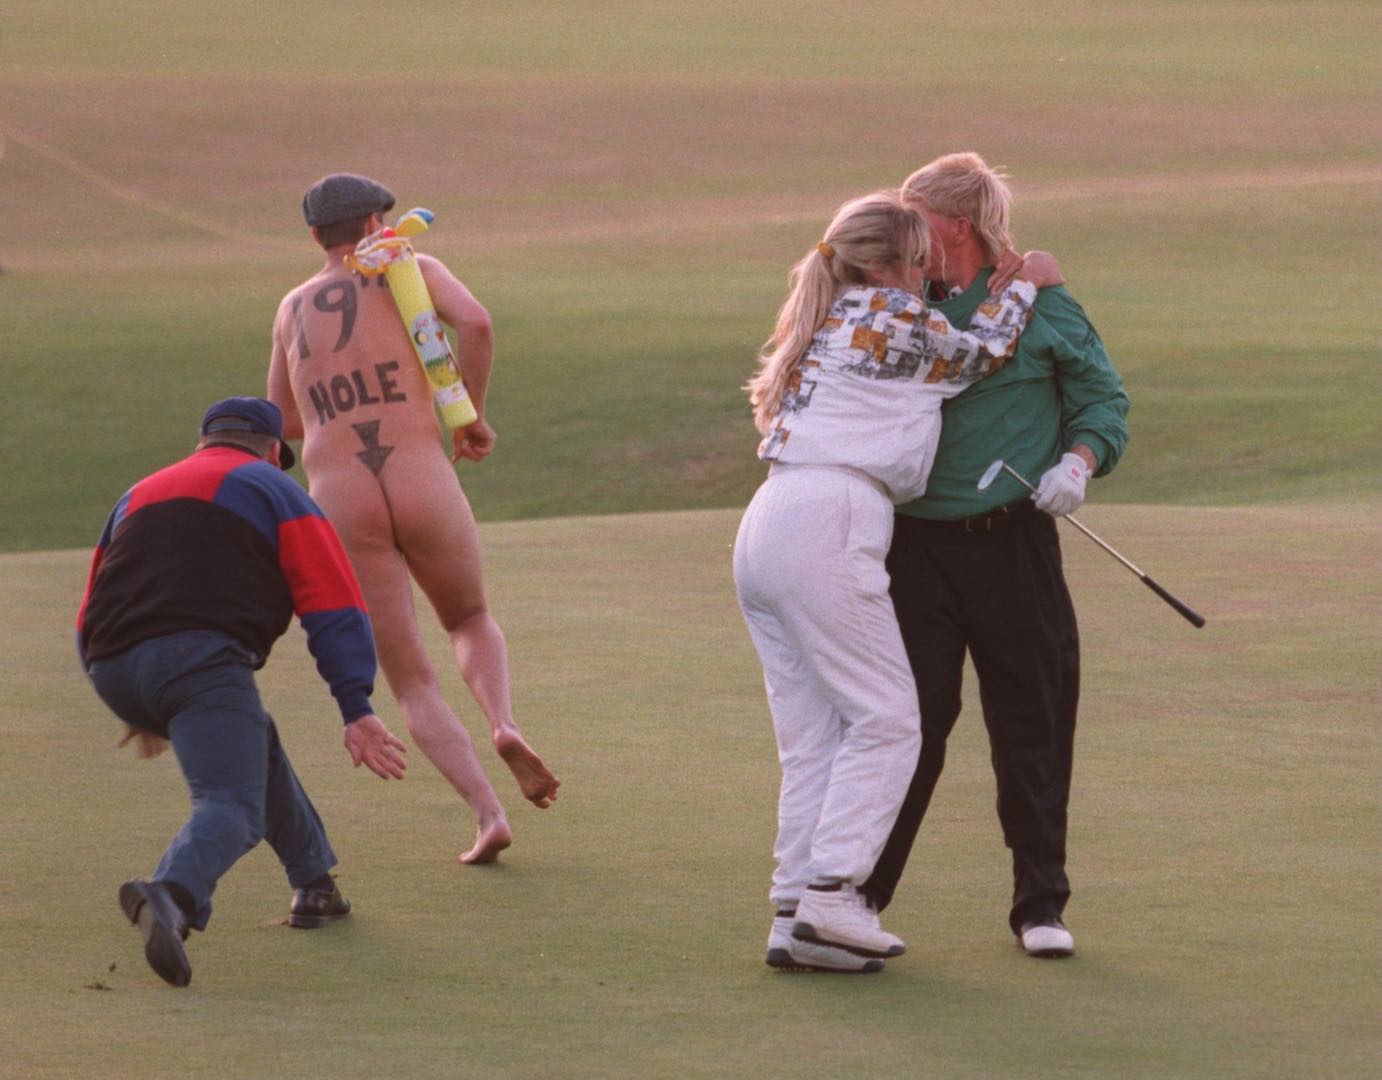 Check out this great tribute video tribute to John Daly in celebration of h...